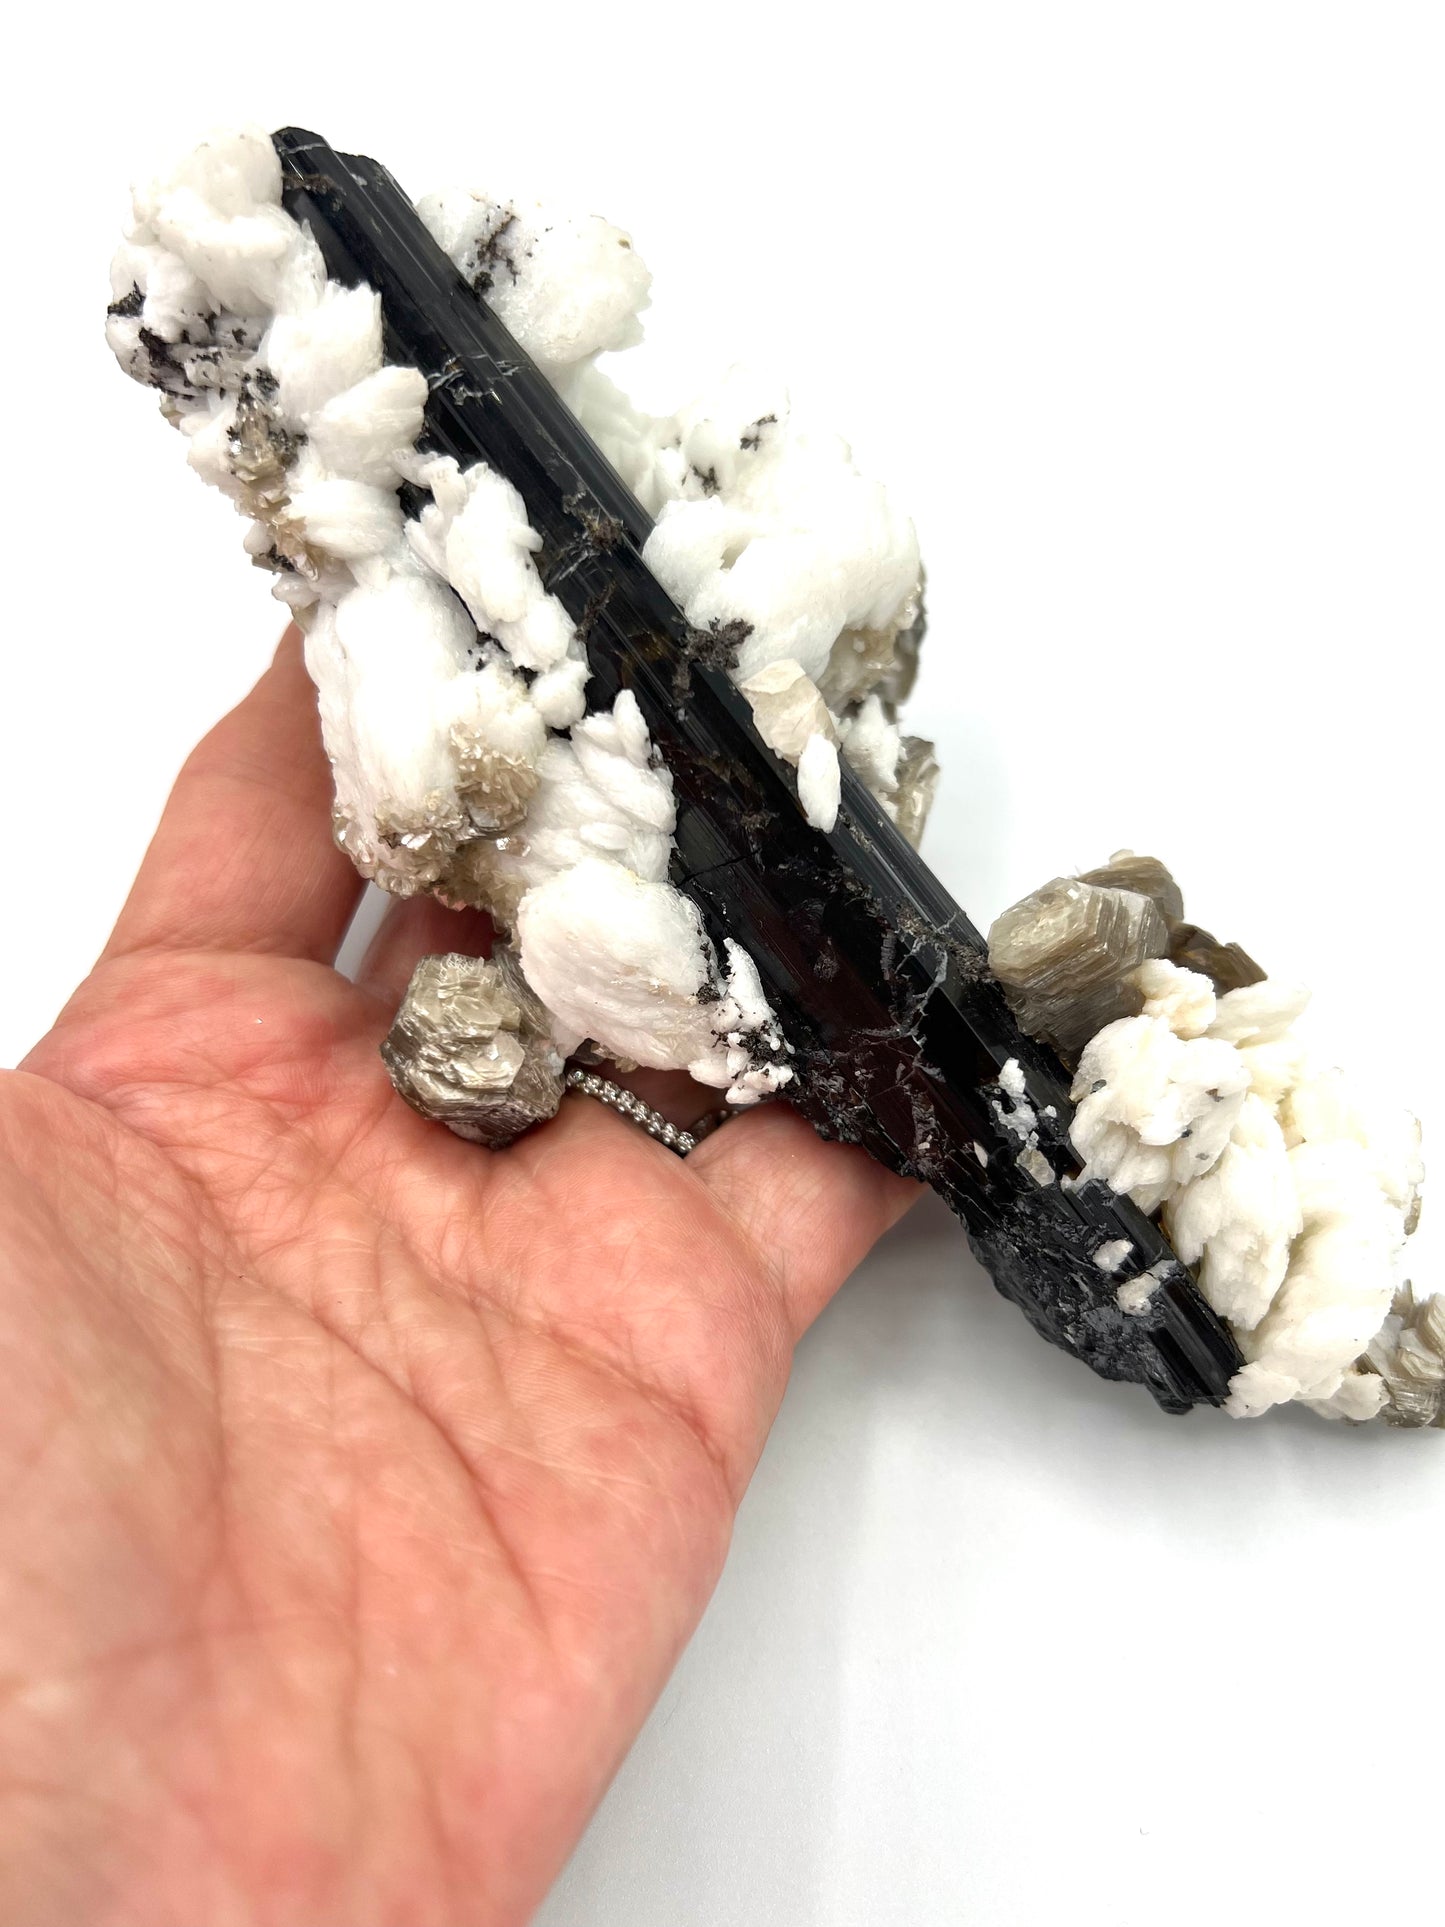 VERY RARE Black Tourmaline with Mica Muscovite Raw Crystal Rock Healing Beautiful One Of A Kind